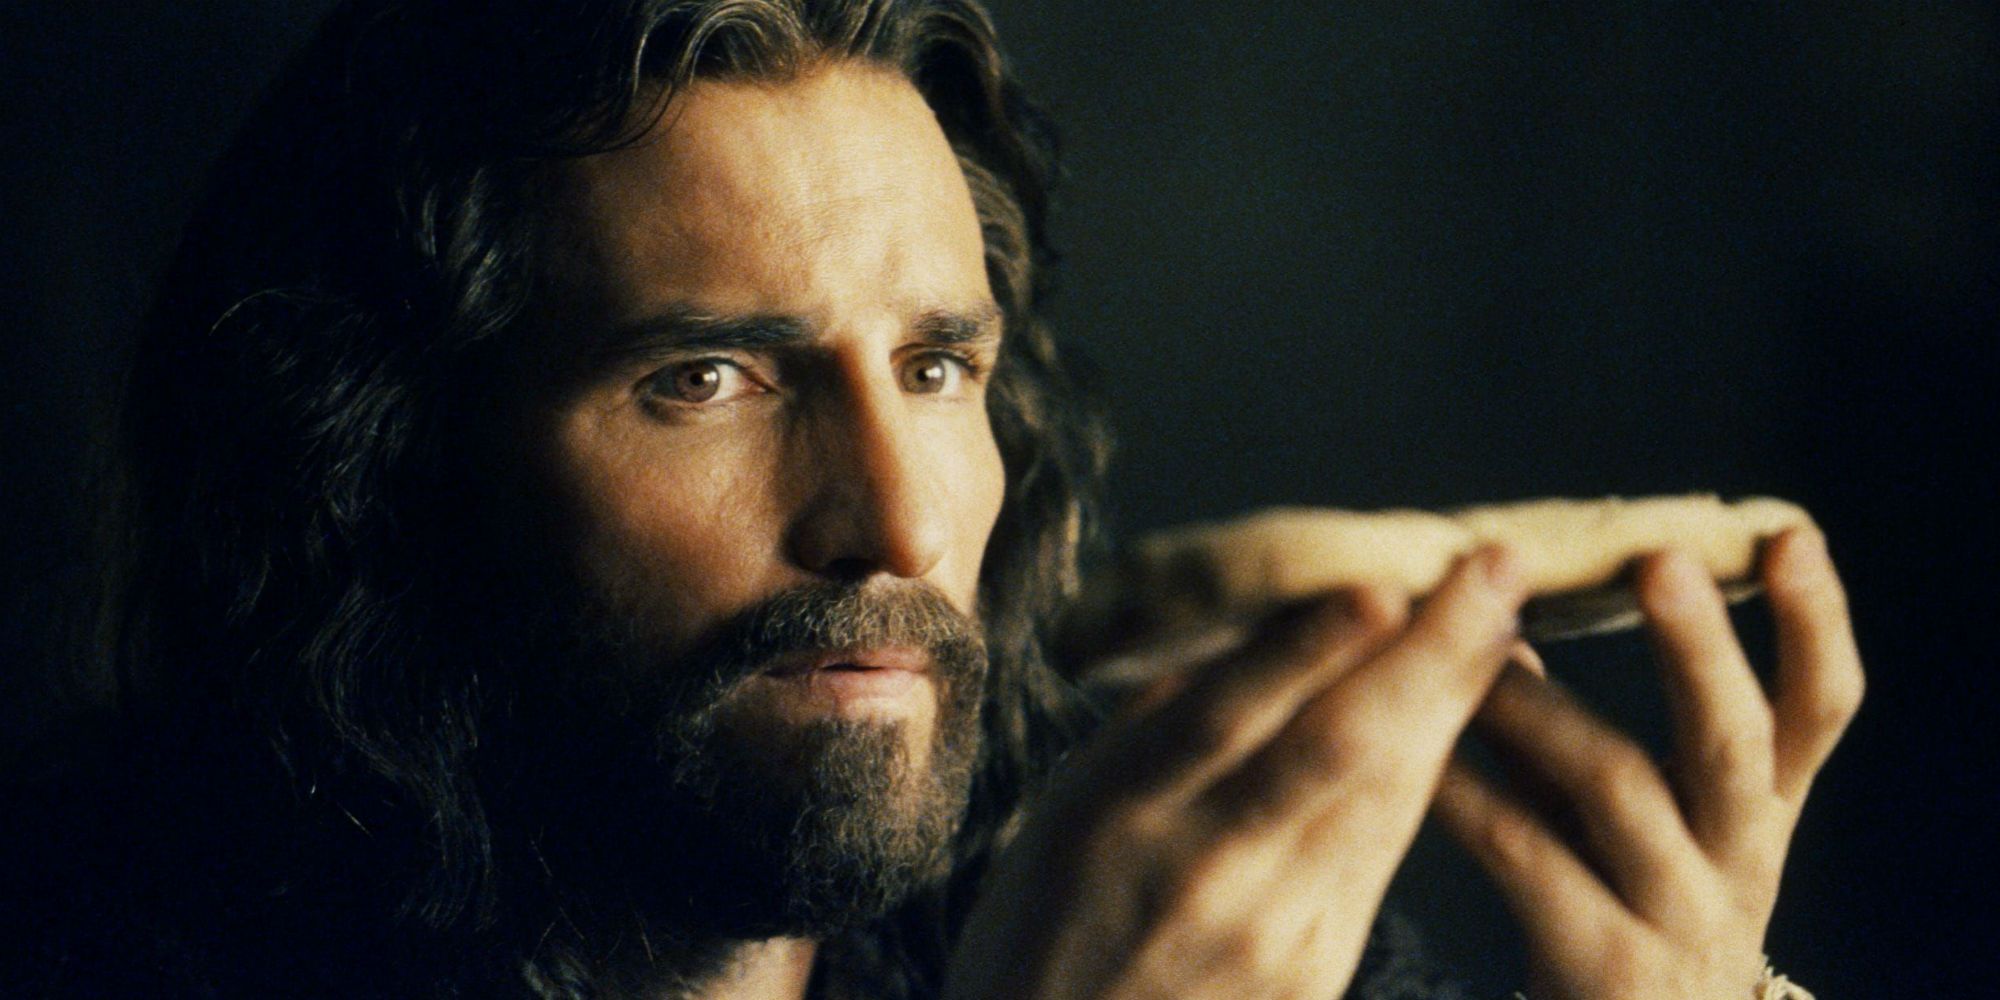 the passion of christ movie conversions portrayed in movie